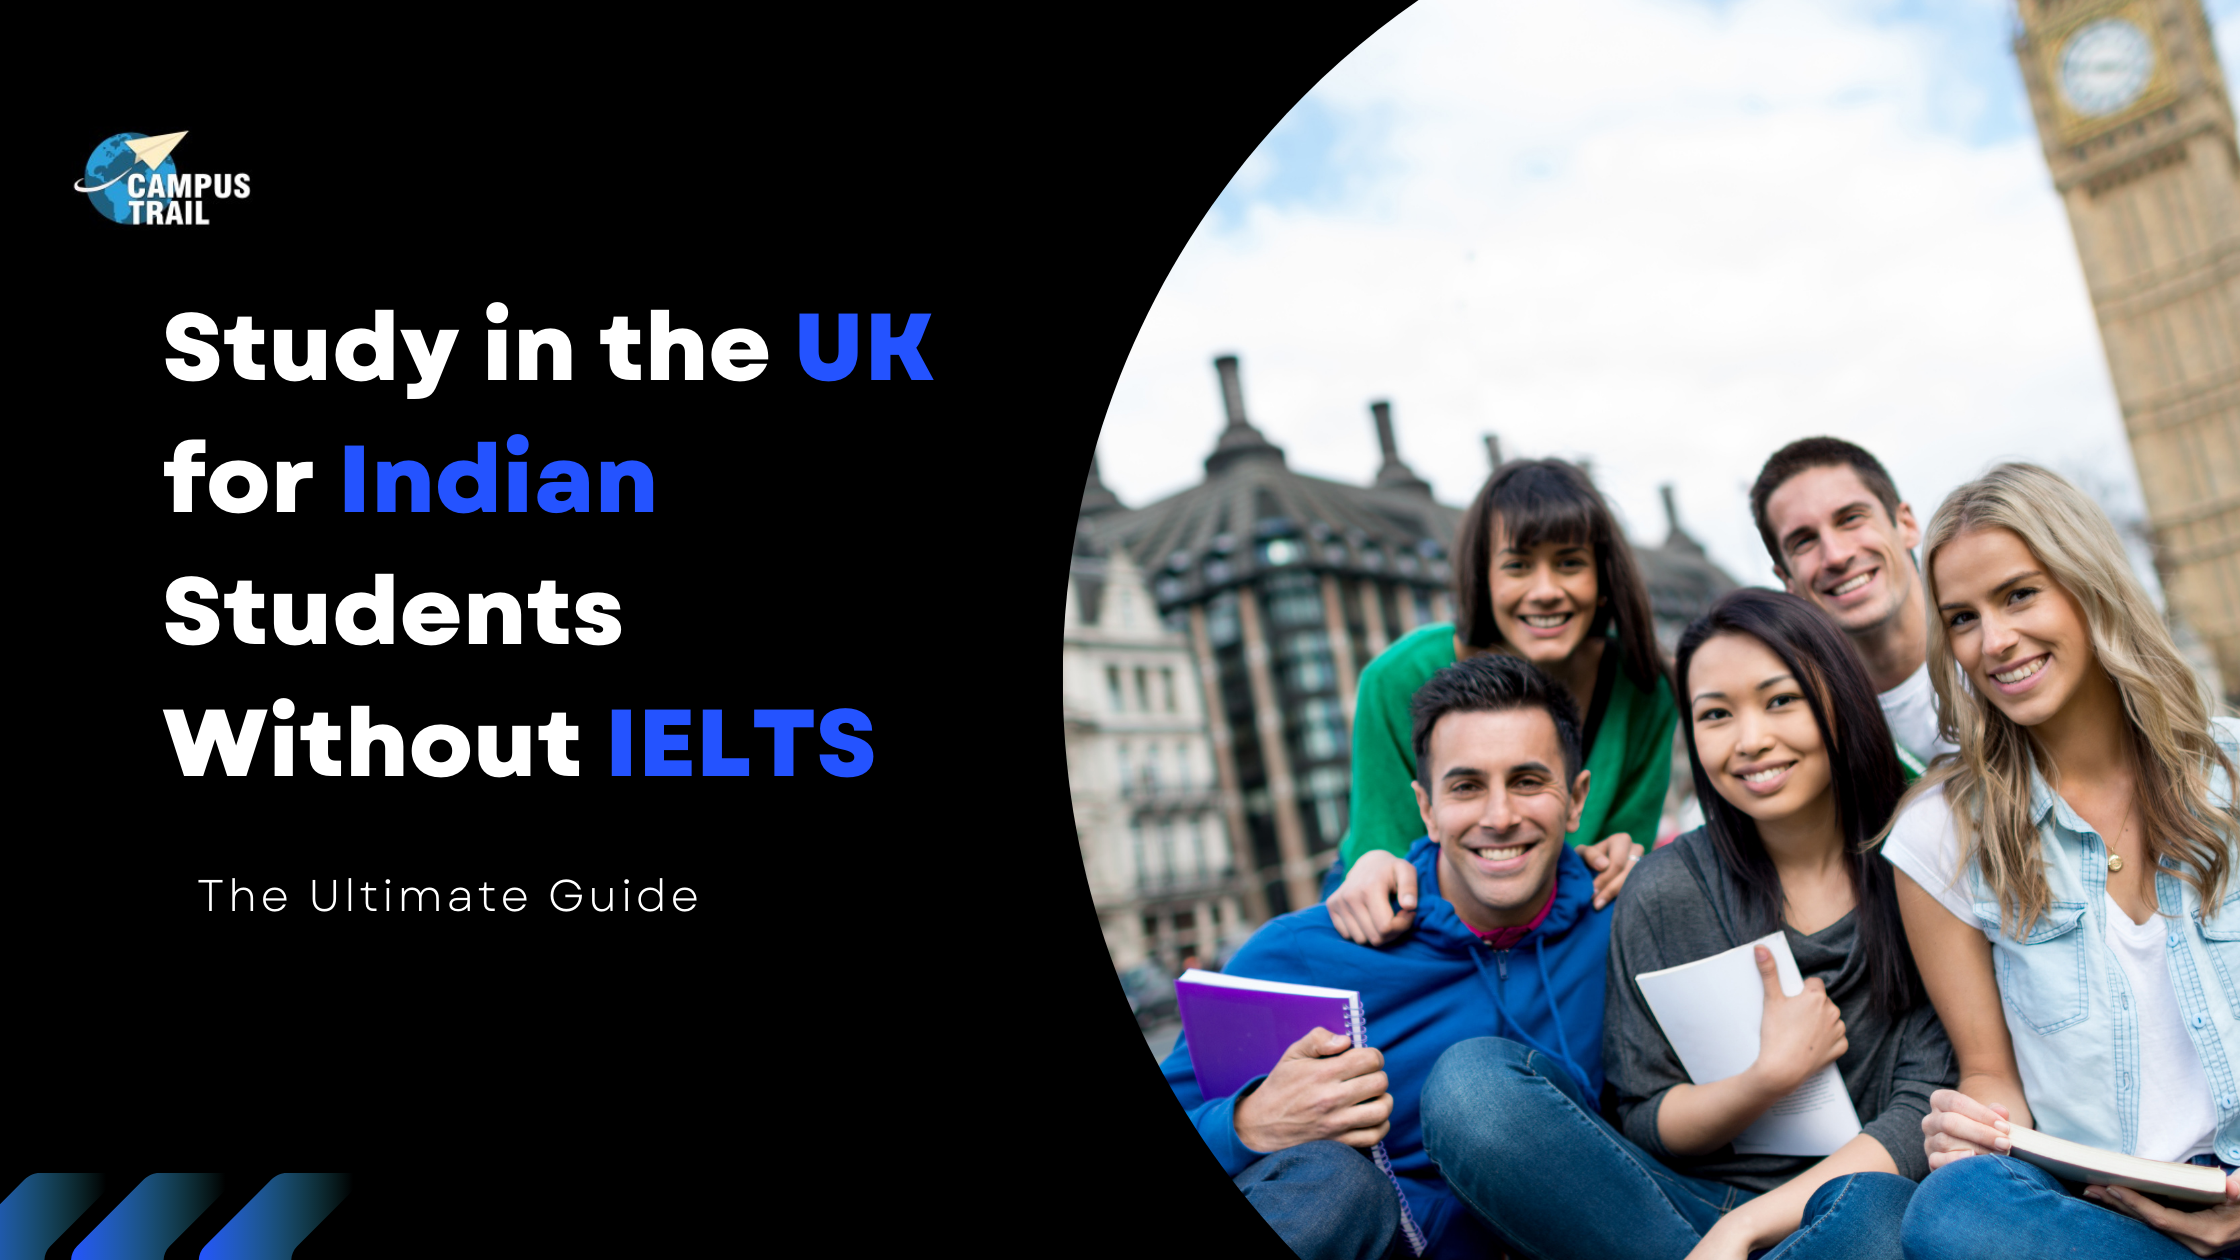 You are currently viewing Study in the UK for Indian Students Without IELTS: The Ultimate Guide